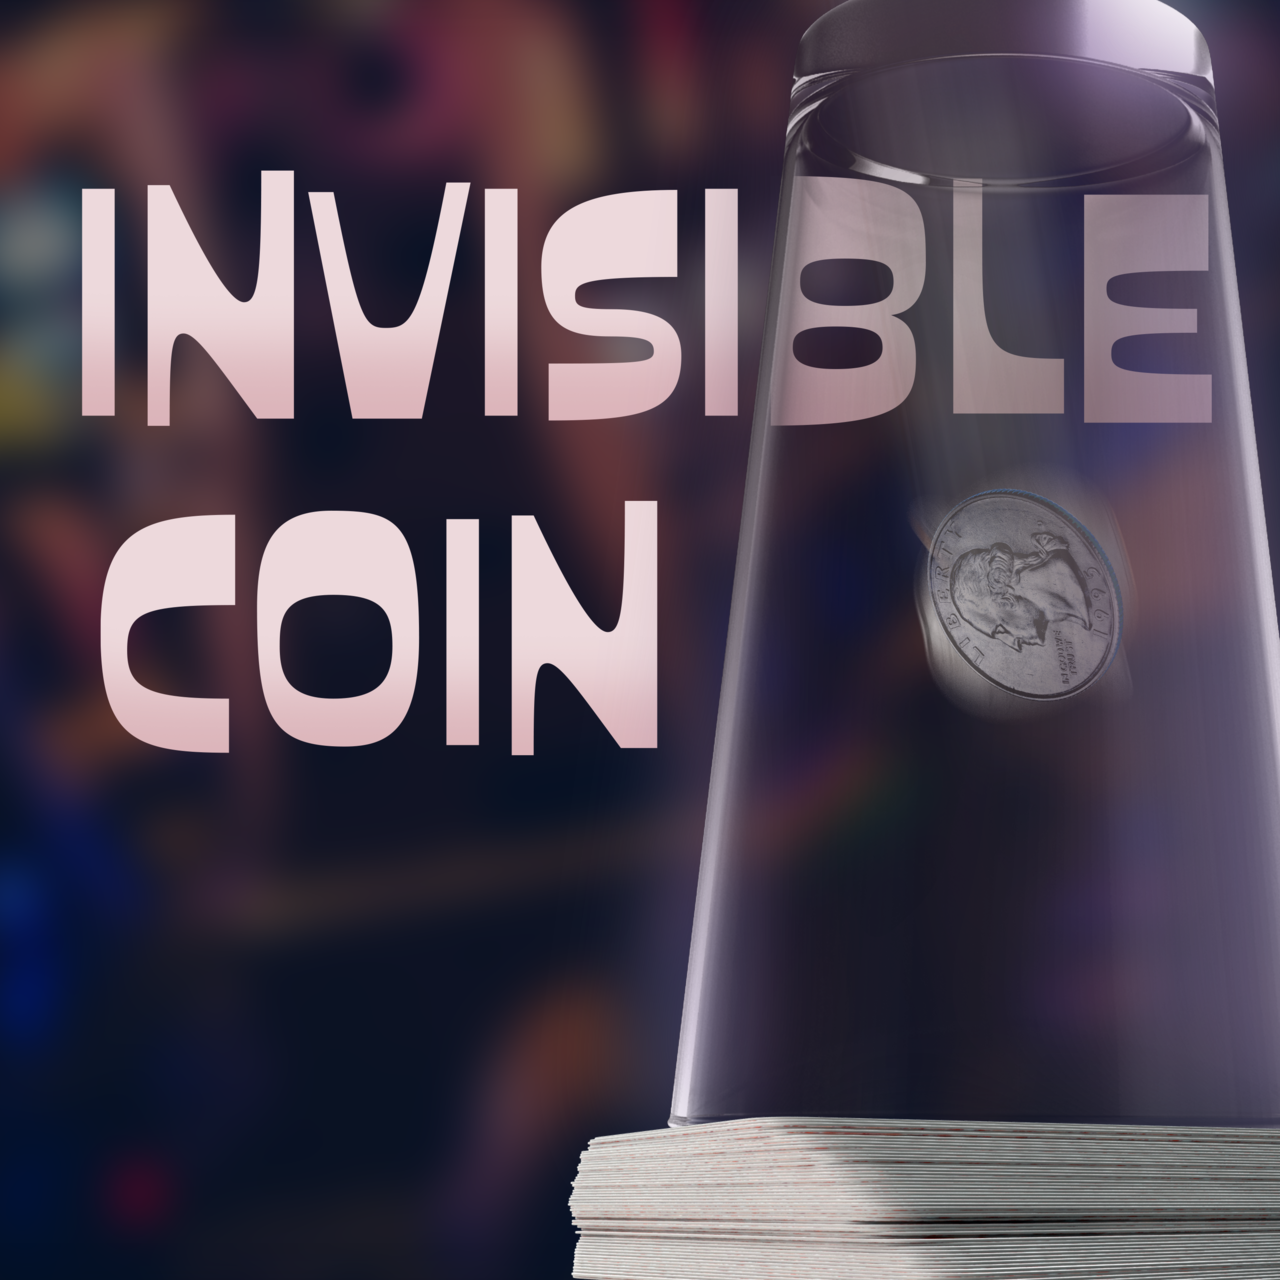 Invisible Coin by Nathan Kranzo (MP4 Video Download)